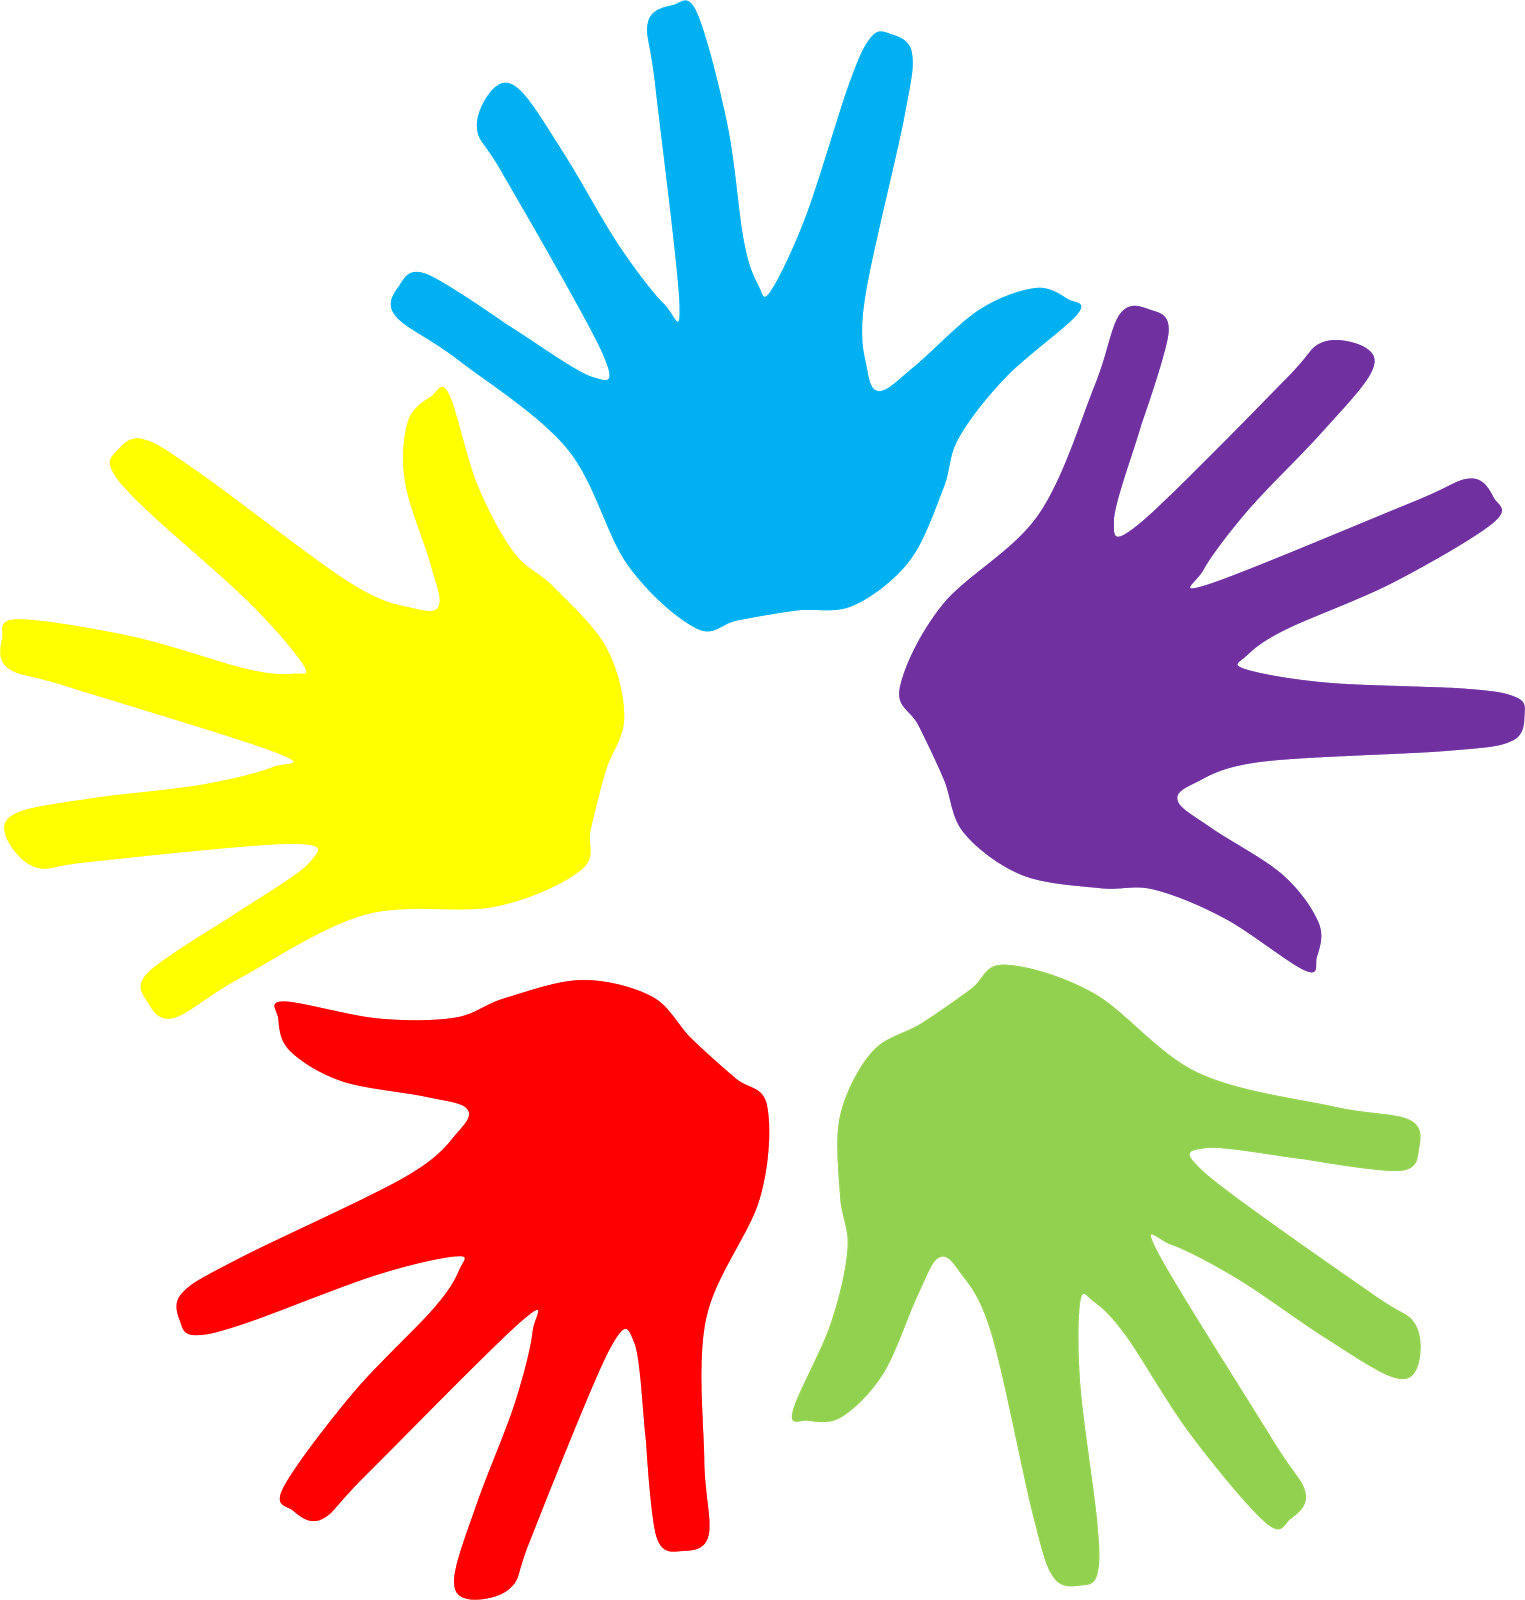 Colorful hands clipart.